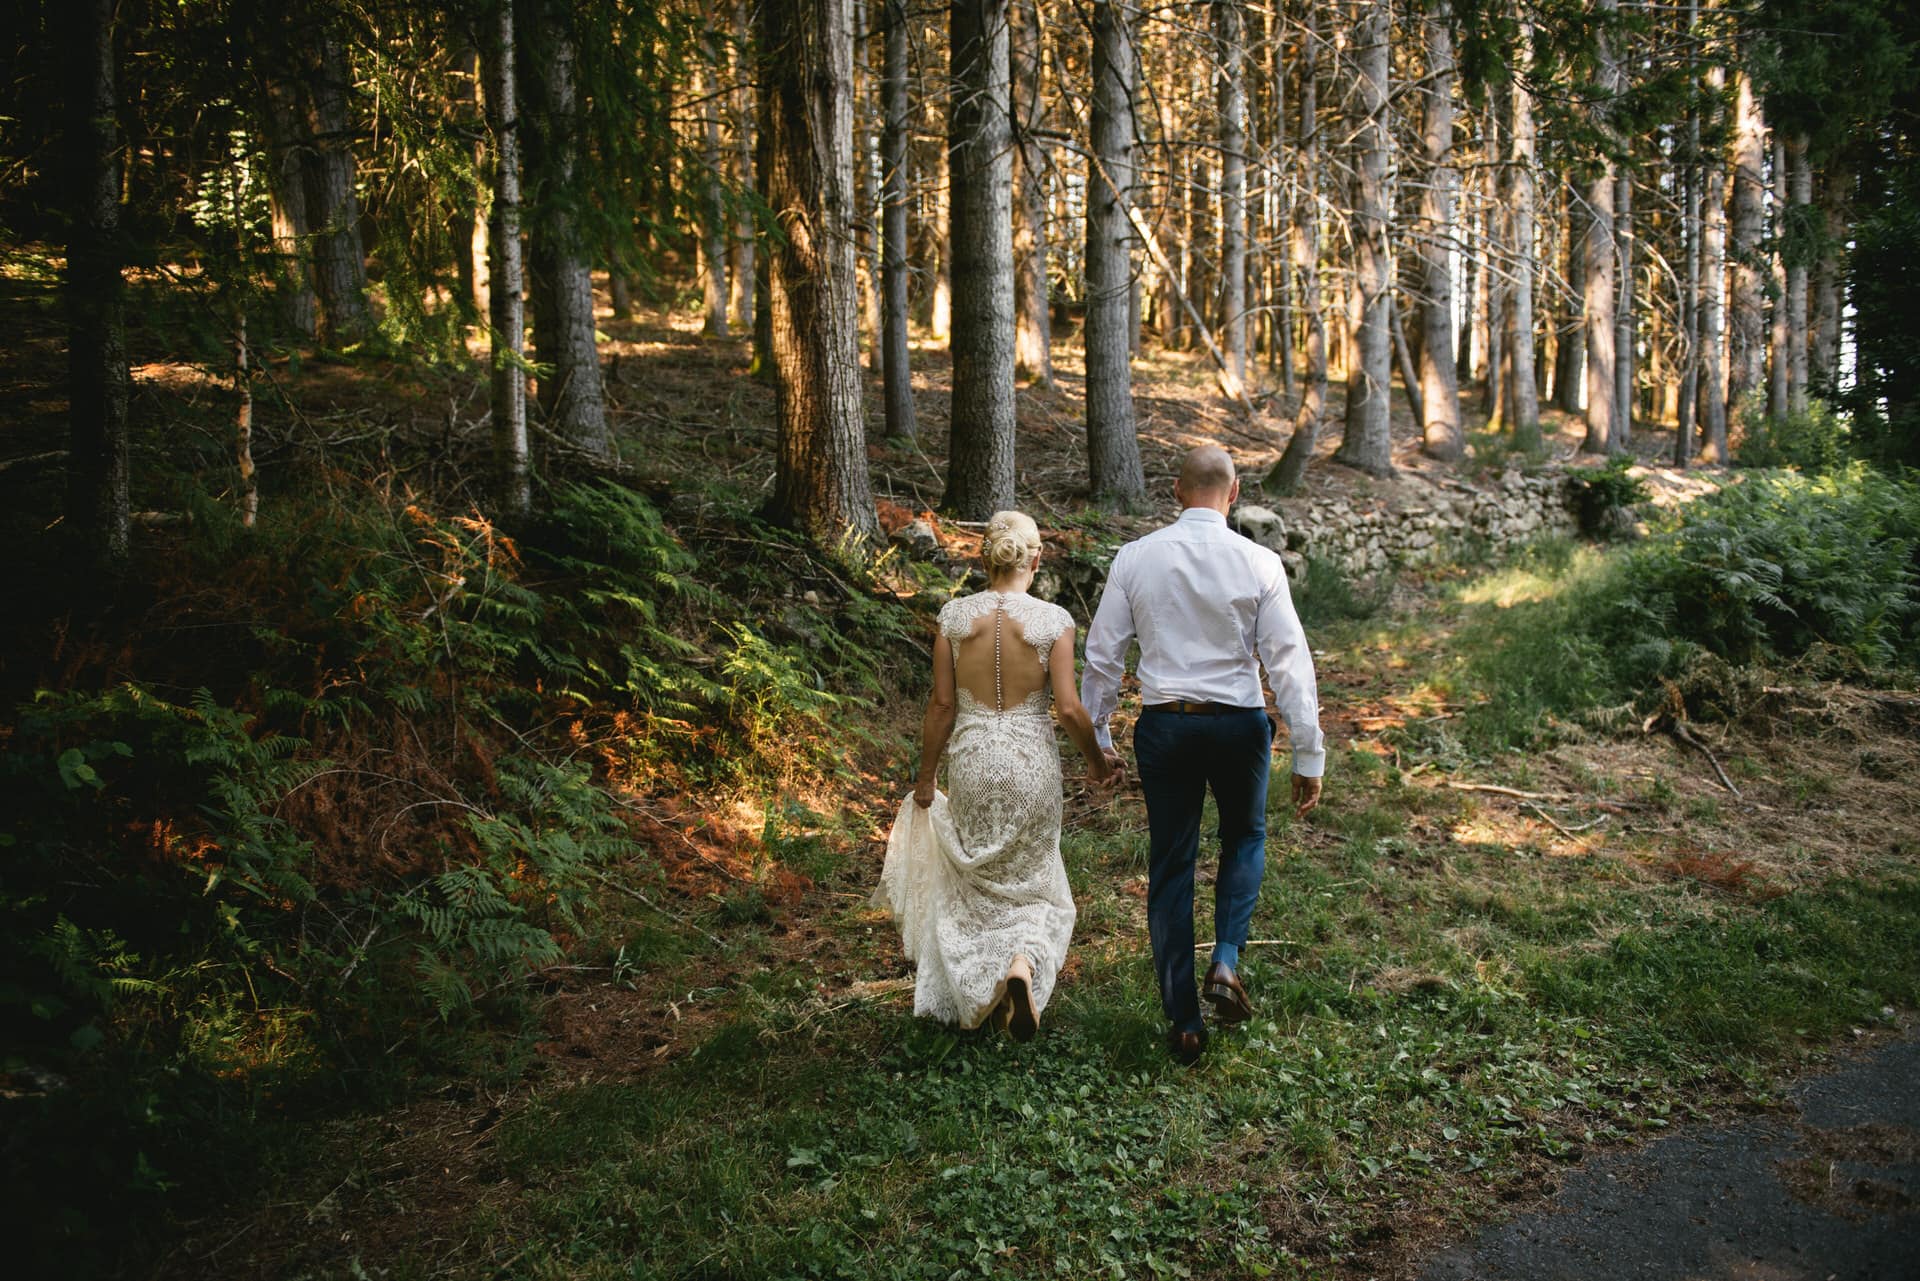 Bride and groom walking in the forest during their elopement in Central France